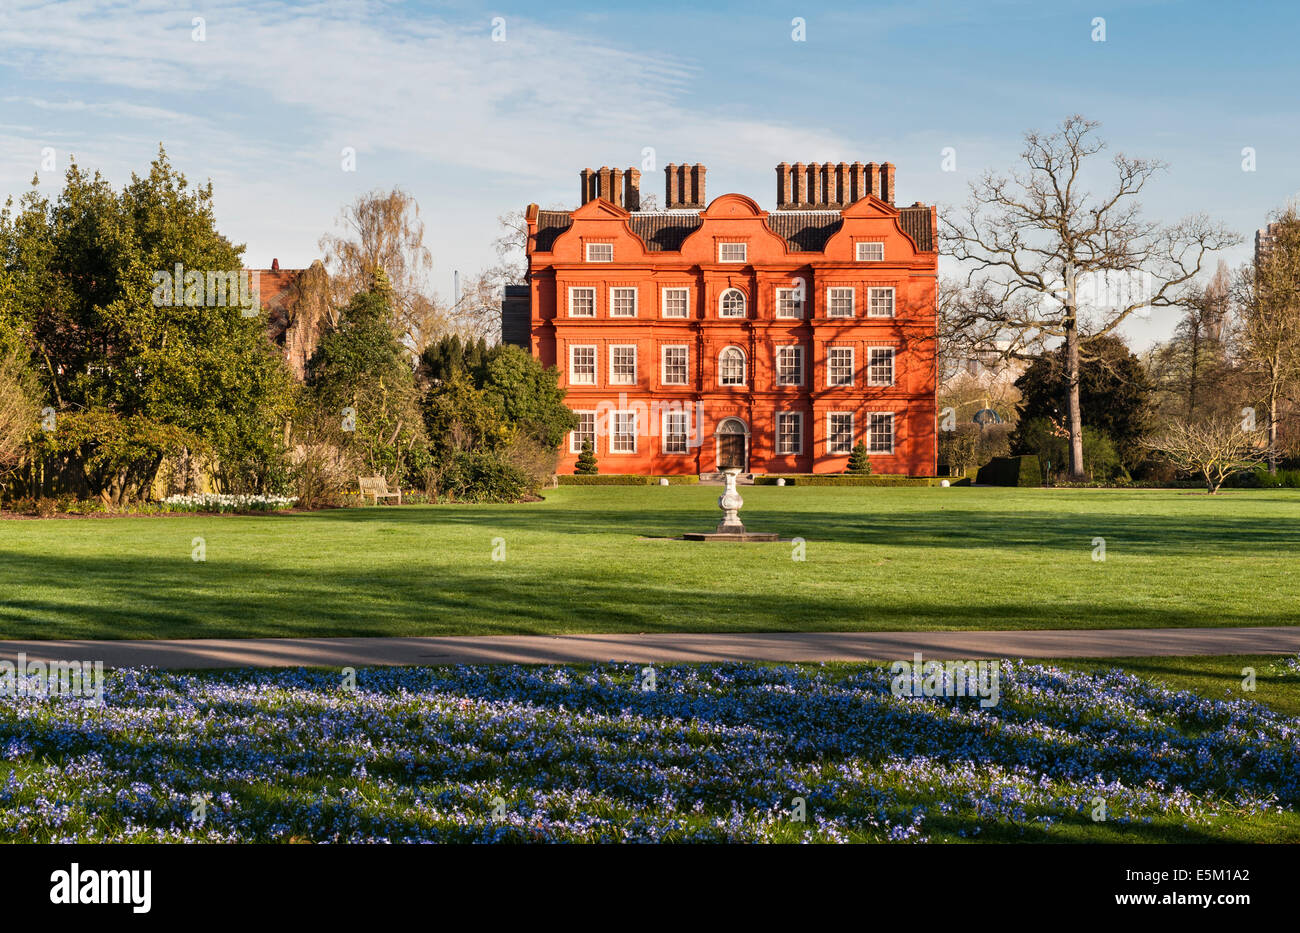 Kew Gardens, London, in the spring. Chionodoxa (glory of the snow) covers the grass in front of Kew Palace (built in 1631) Stock Photo